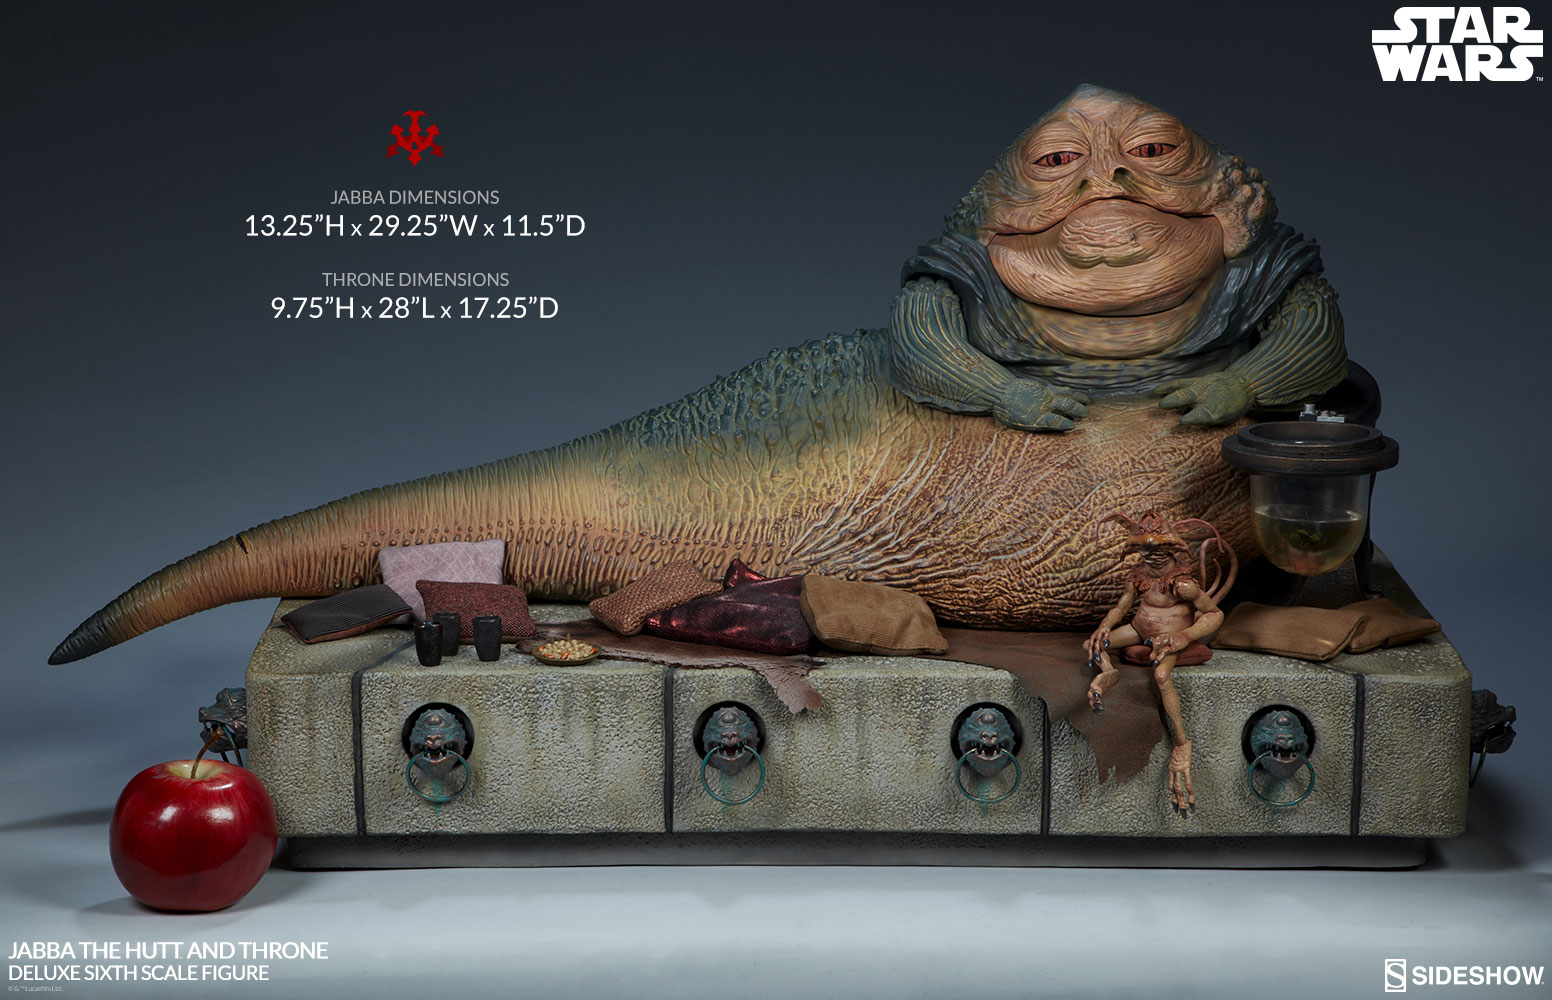 star-wars-jabba-the-hutt-and-throne-deluxe-sixth-scale-figure-sideshow-100410-10.jpg